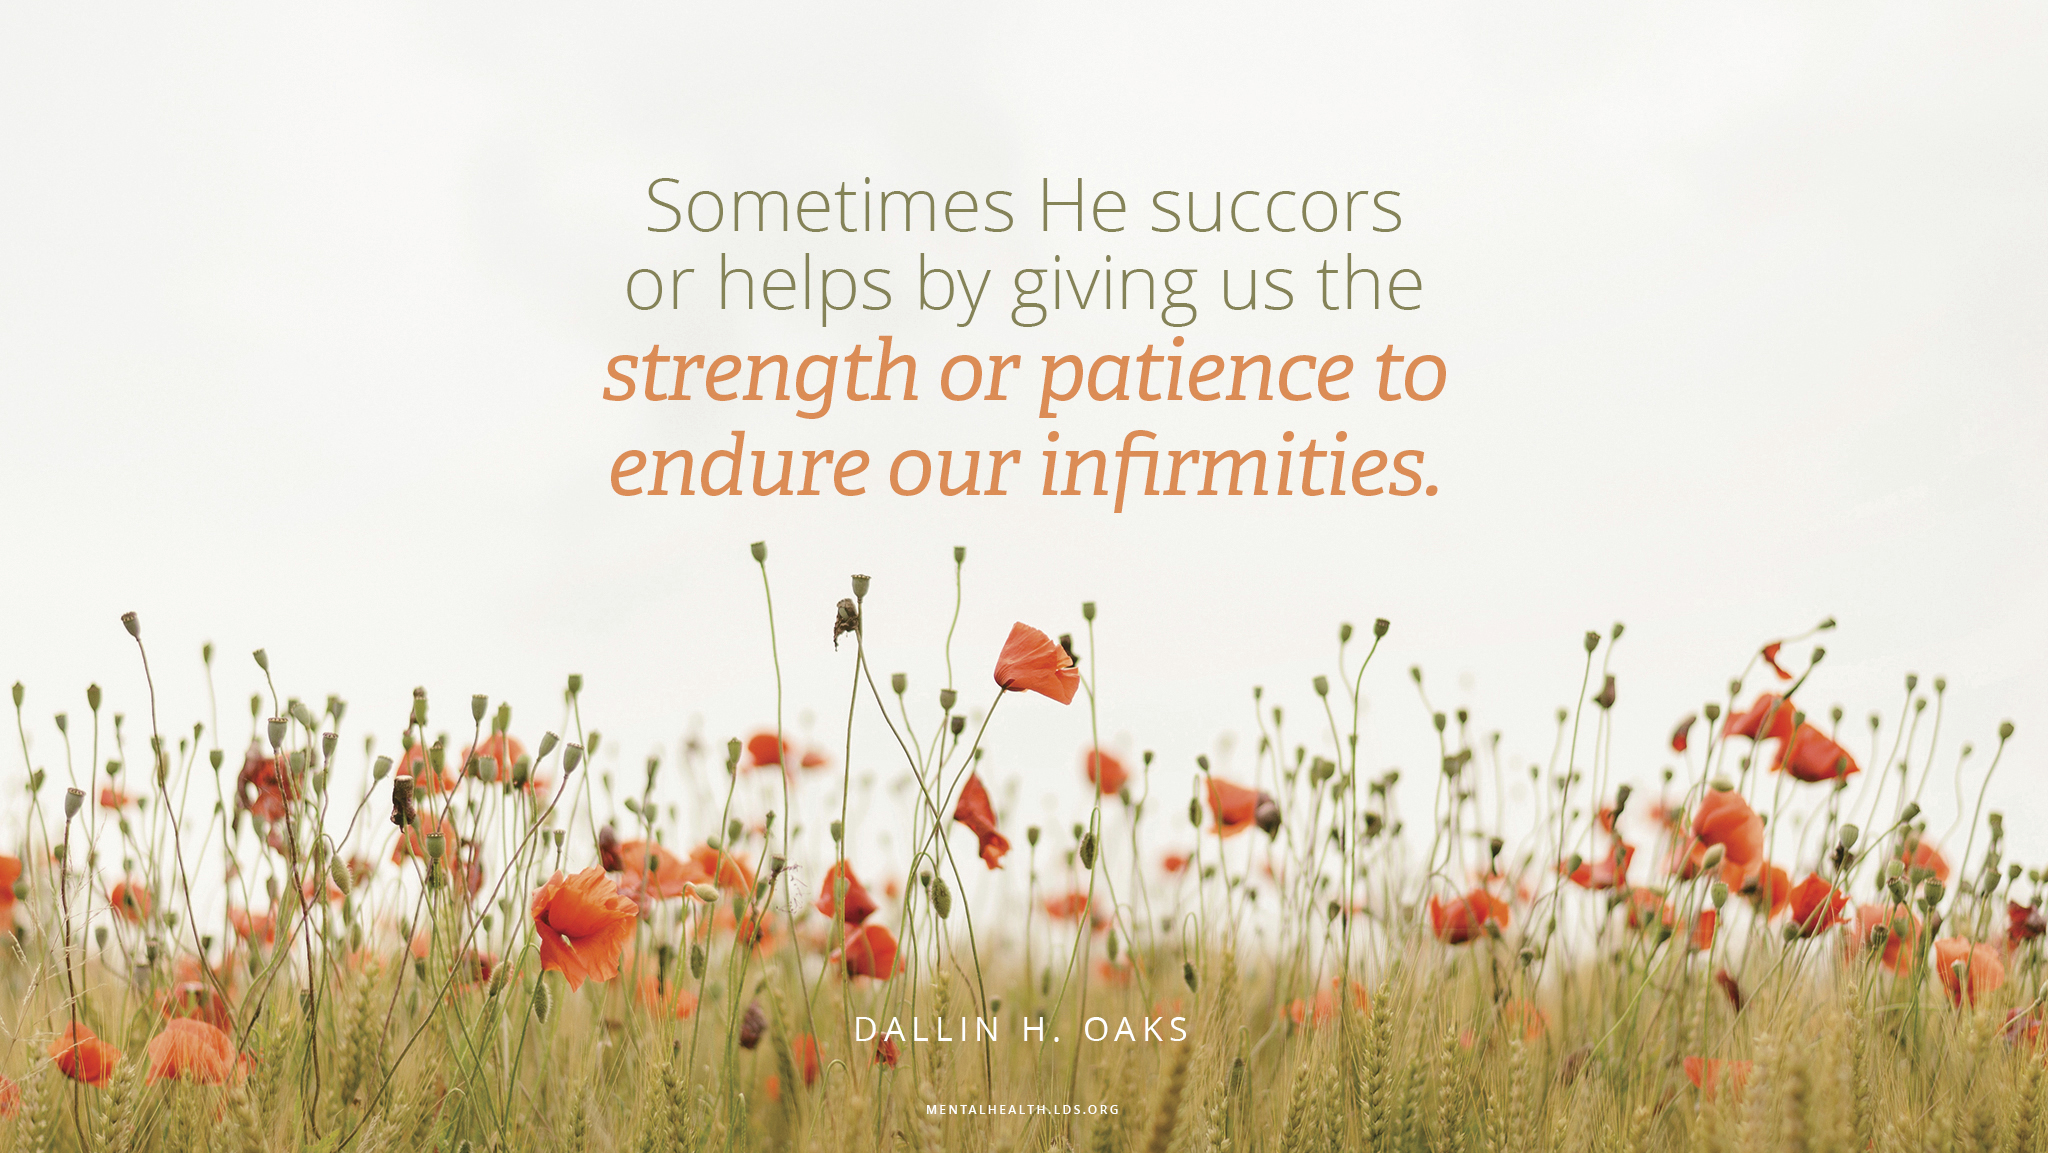 “Sometimes His power heals an infirmity, but the scriptures and our experiences teach that sometimes He succors or helps by giving us the strength or patience to endure our infirmities.”—Elder Dallin H. Oaks, “Strengthened by the Atonement of Jesus Christ”